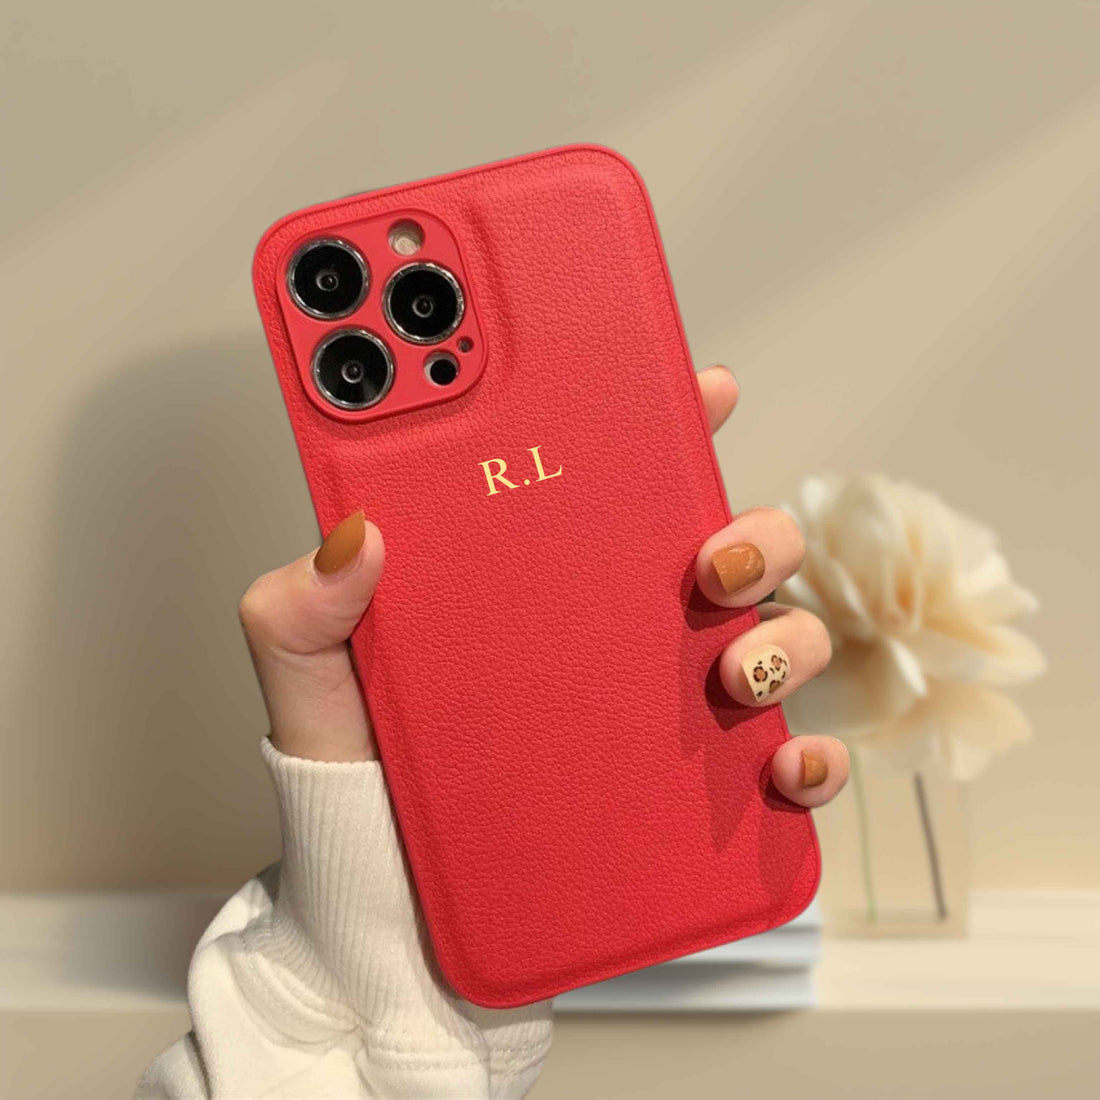 Red Leather iPhone Case